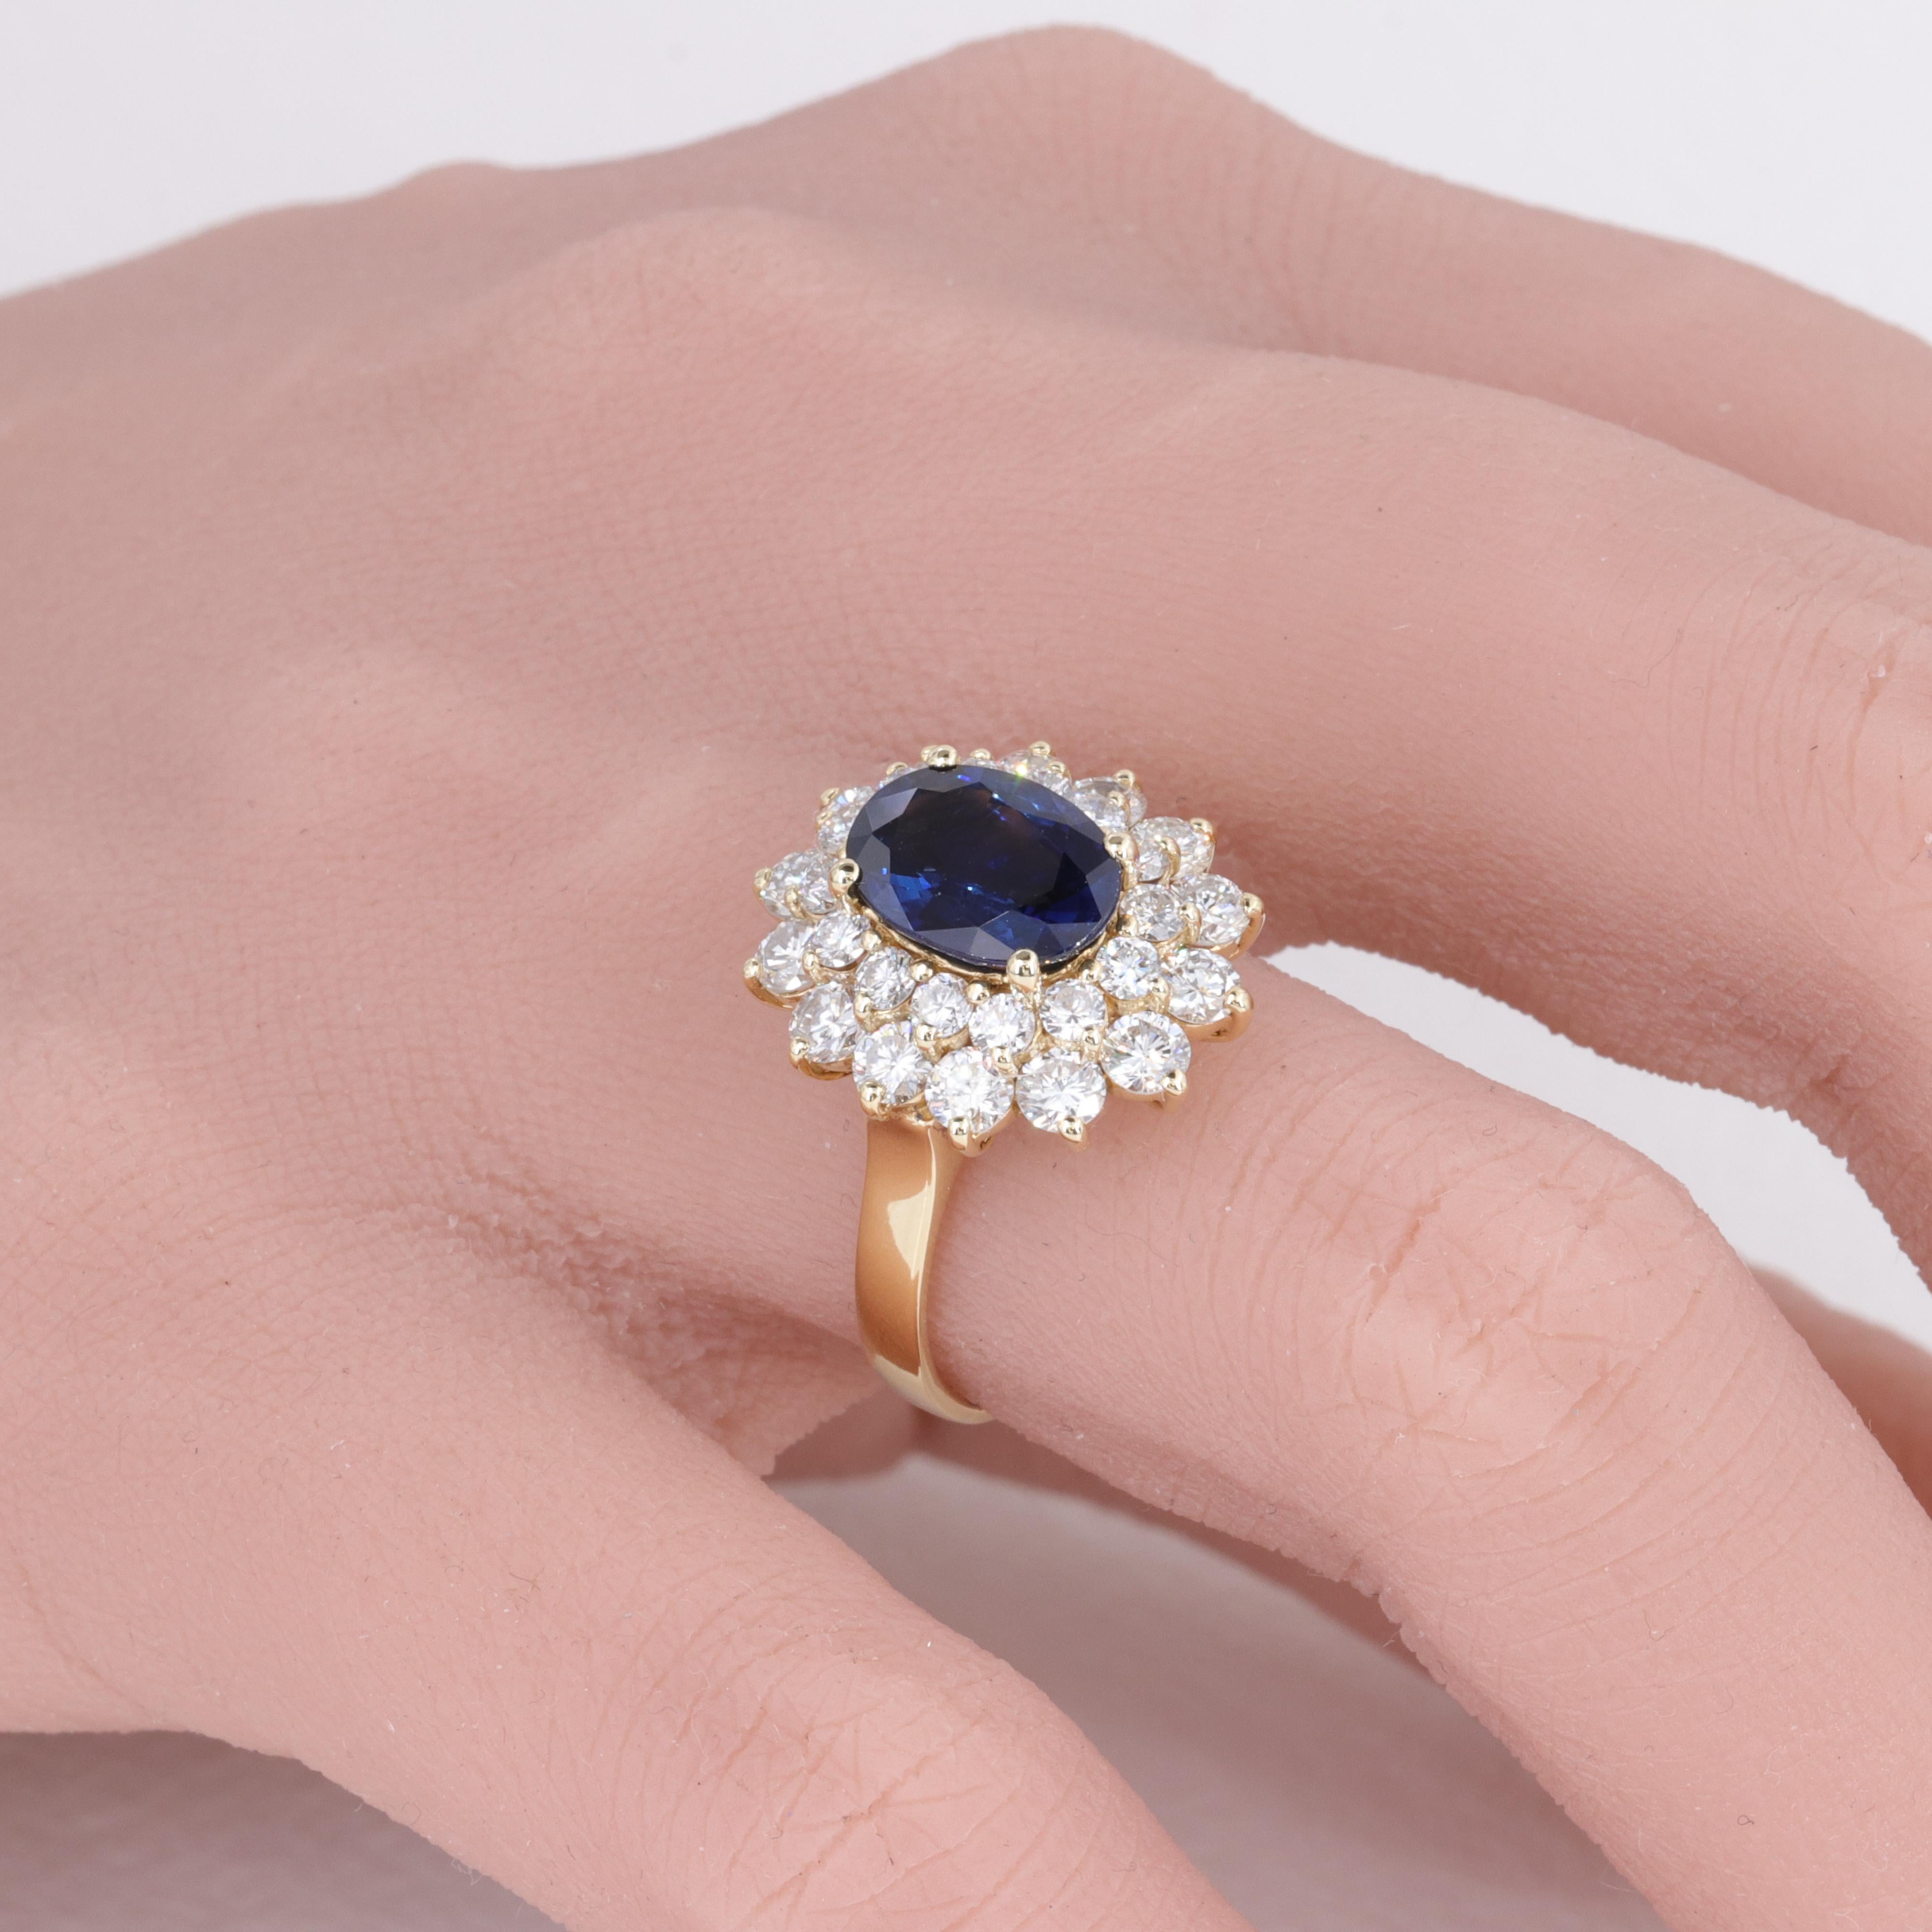 Blue Sapphire Oval and Diamond Halo Ring by Mayors in 18 Karat Yellow Gold

Sapphire:

Carat - Approx 1.80ct
Dimensions - 9.49 x 6.80 x 3.78mm 
Color - Deep Blue
Eye Clean

Diamonds:

Carat - Approx 1.68ct
Color - H/I
Clarity - VS

Ring :

18 Karat